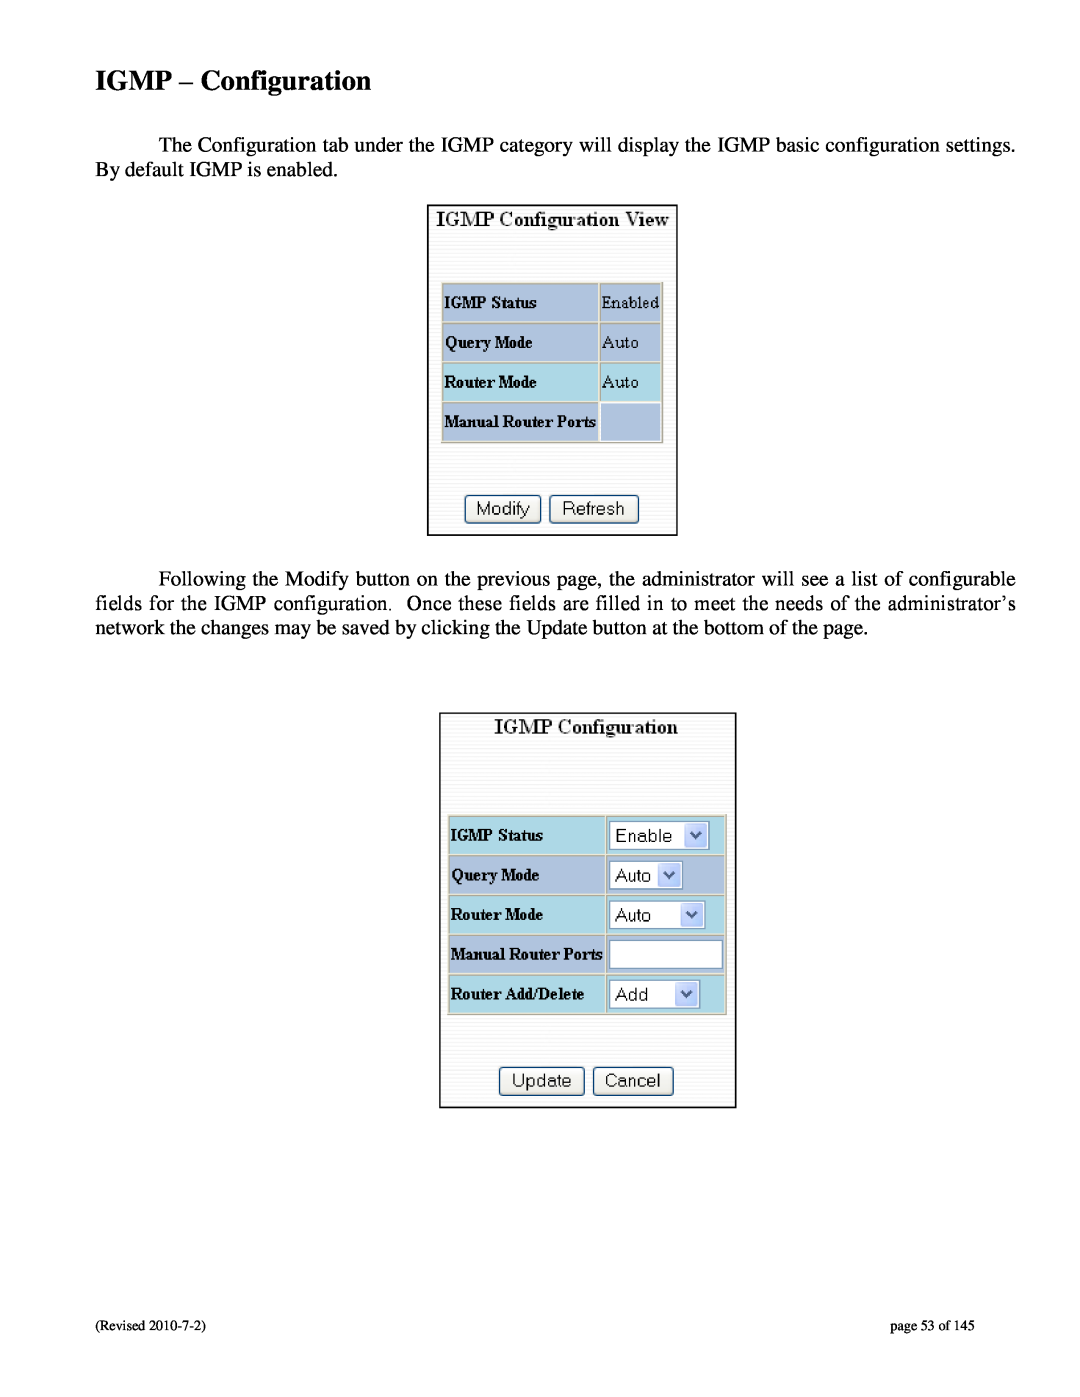 N-Tron 9000 user manual IGMP - Configuration, page 53 of 